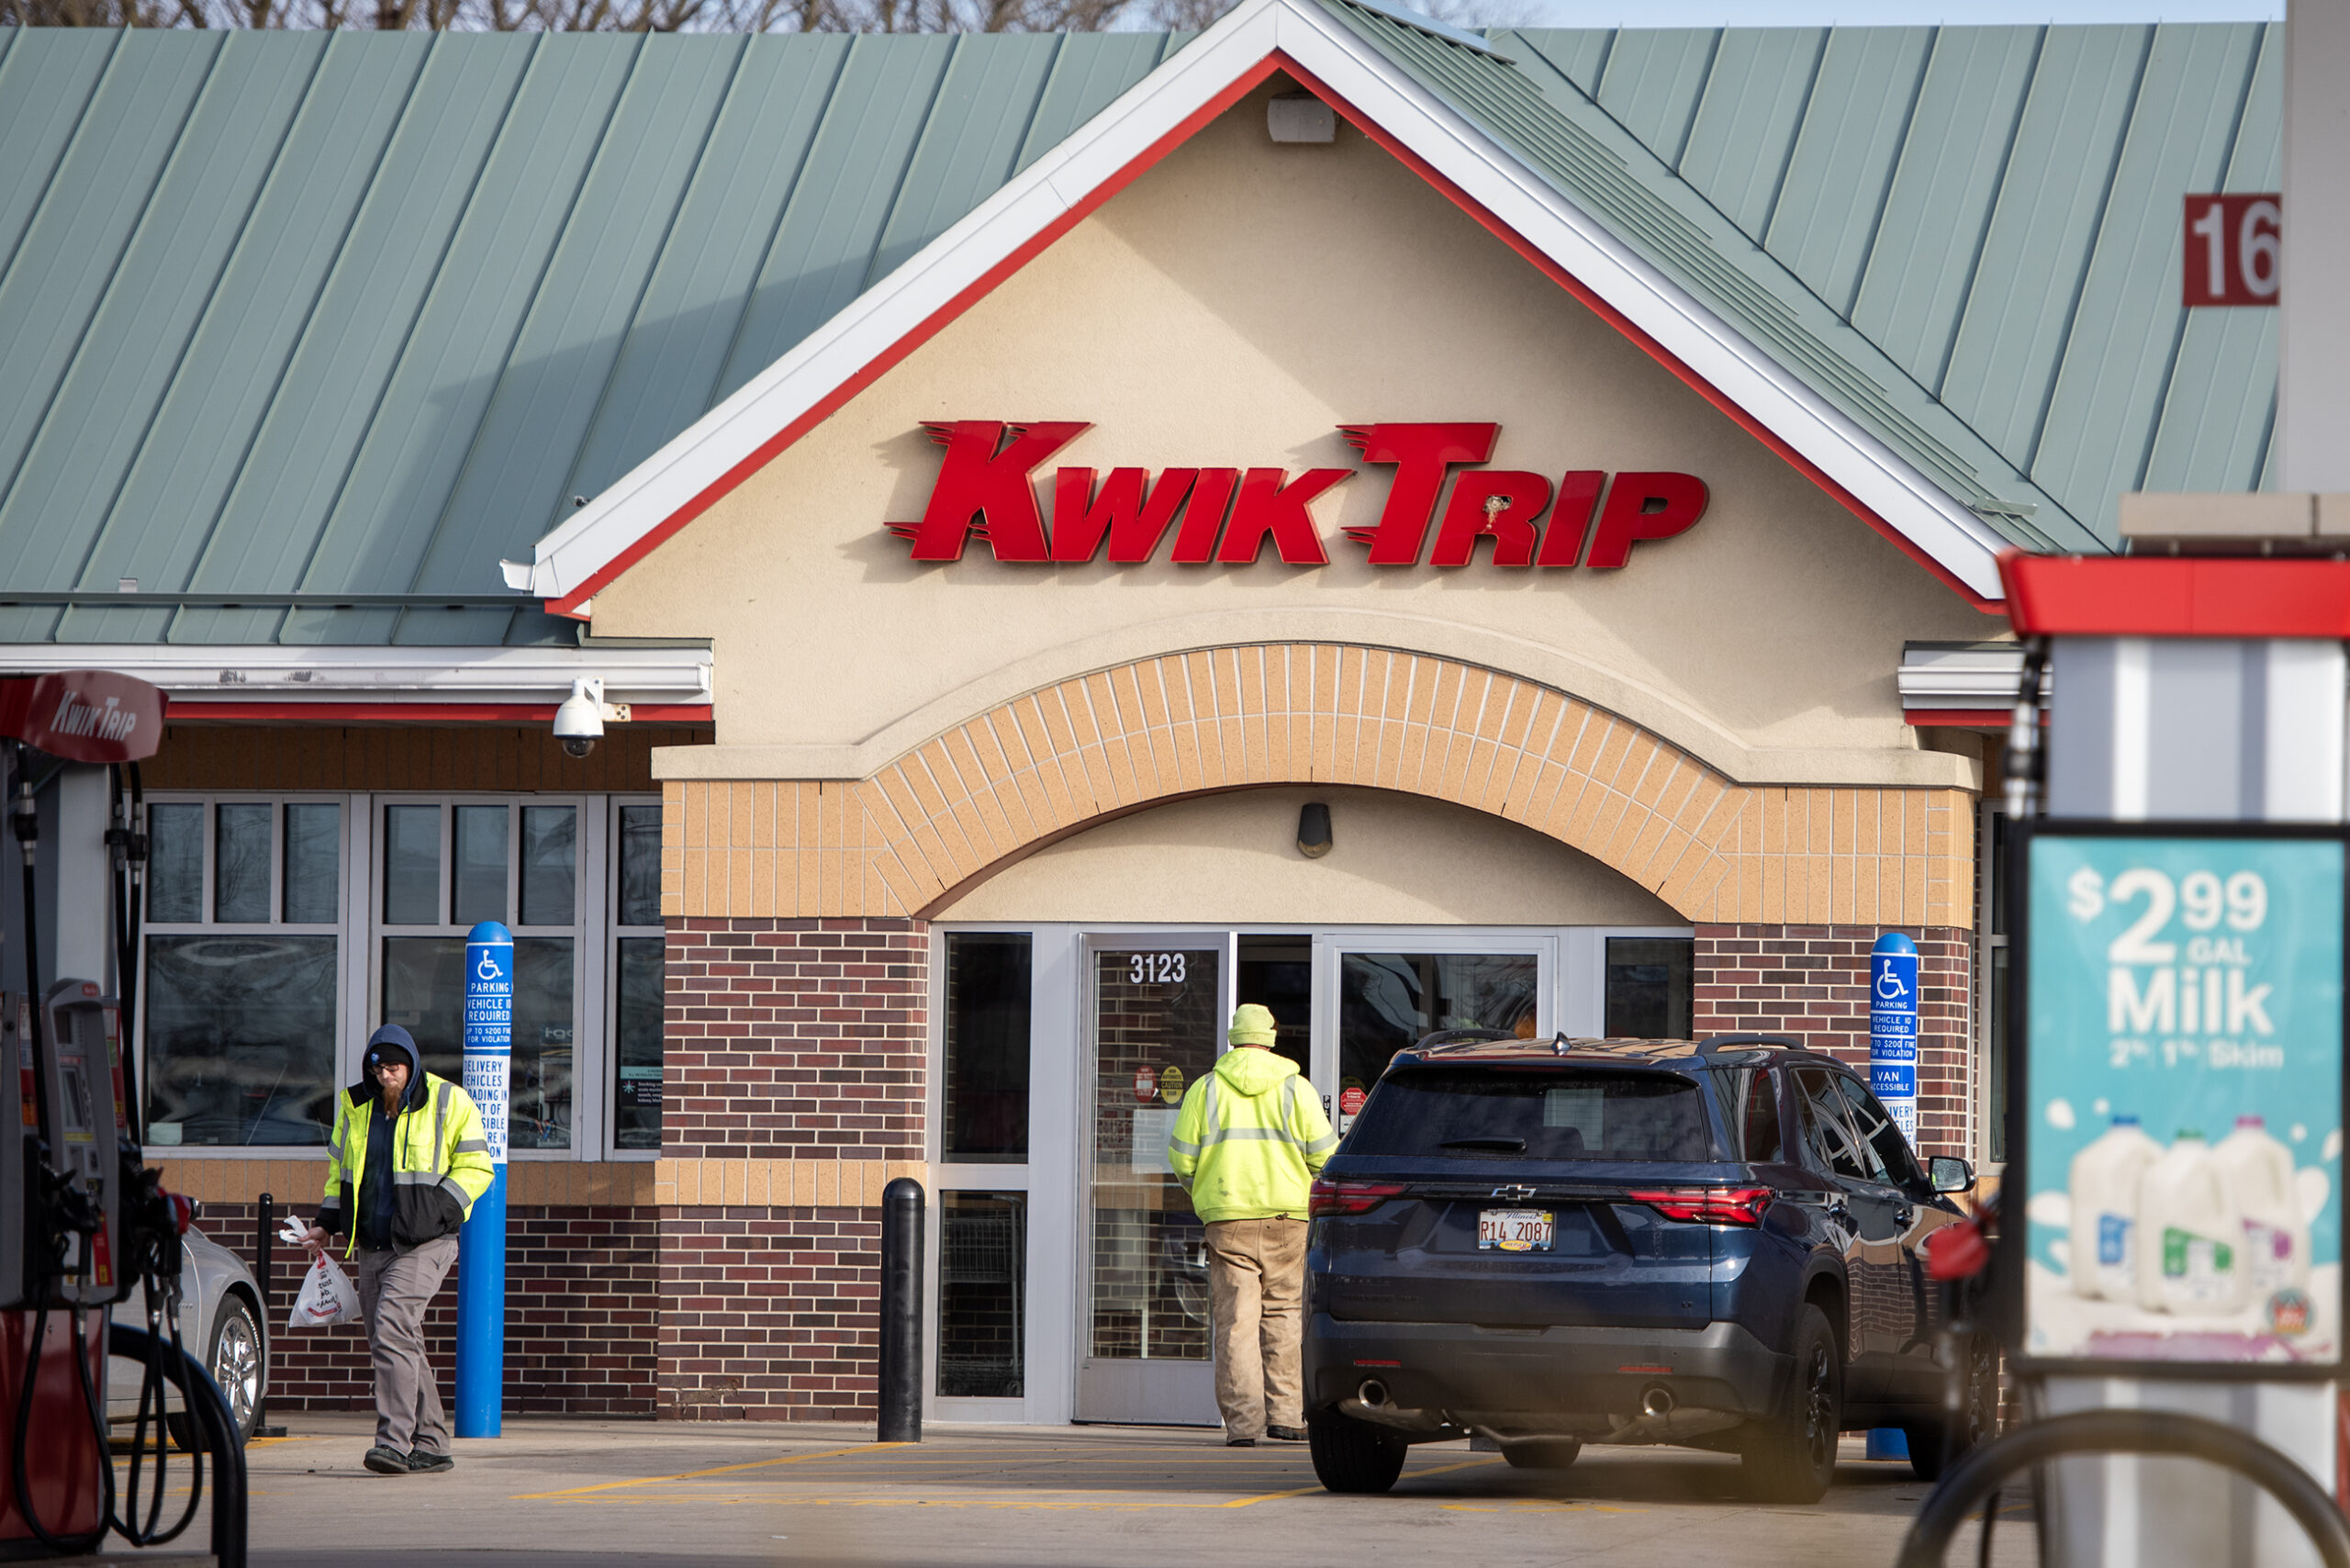 Customers enter and exit the front doors of a Kwik Trip convenience store on a sunny day.